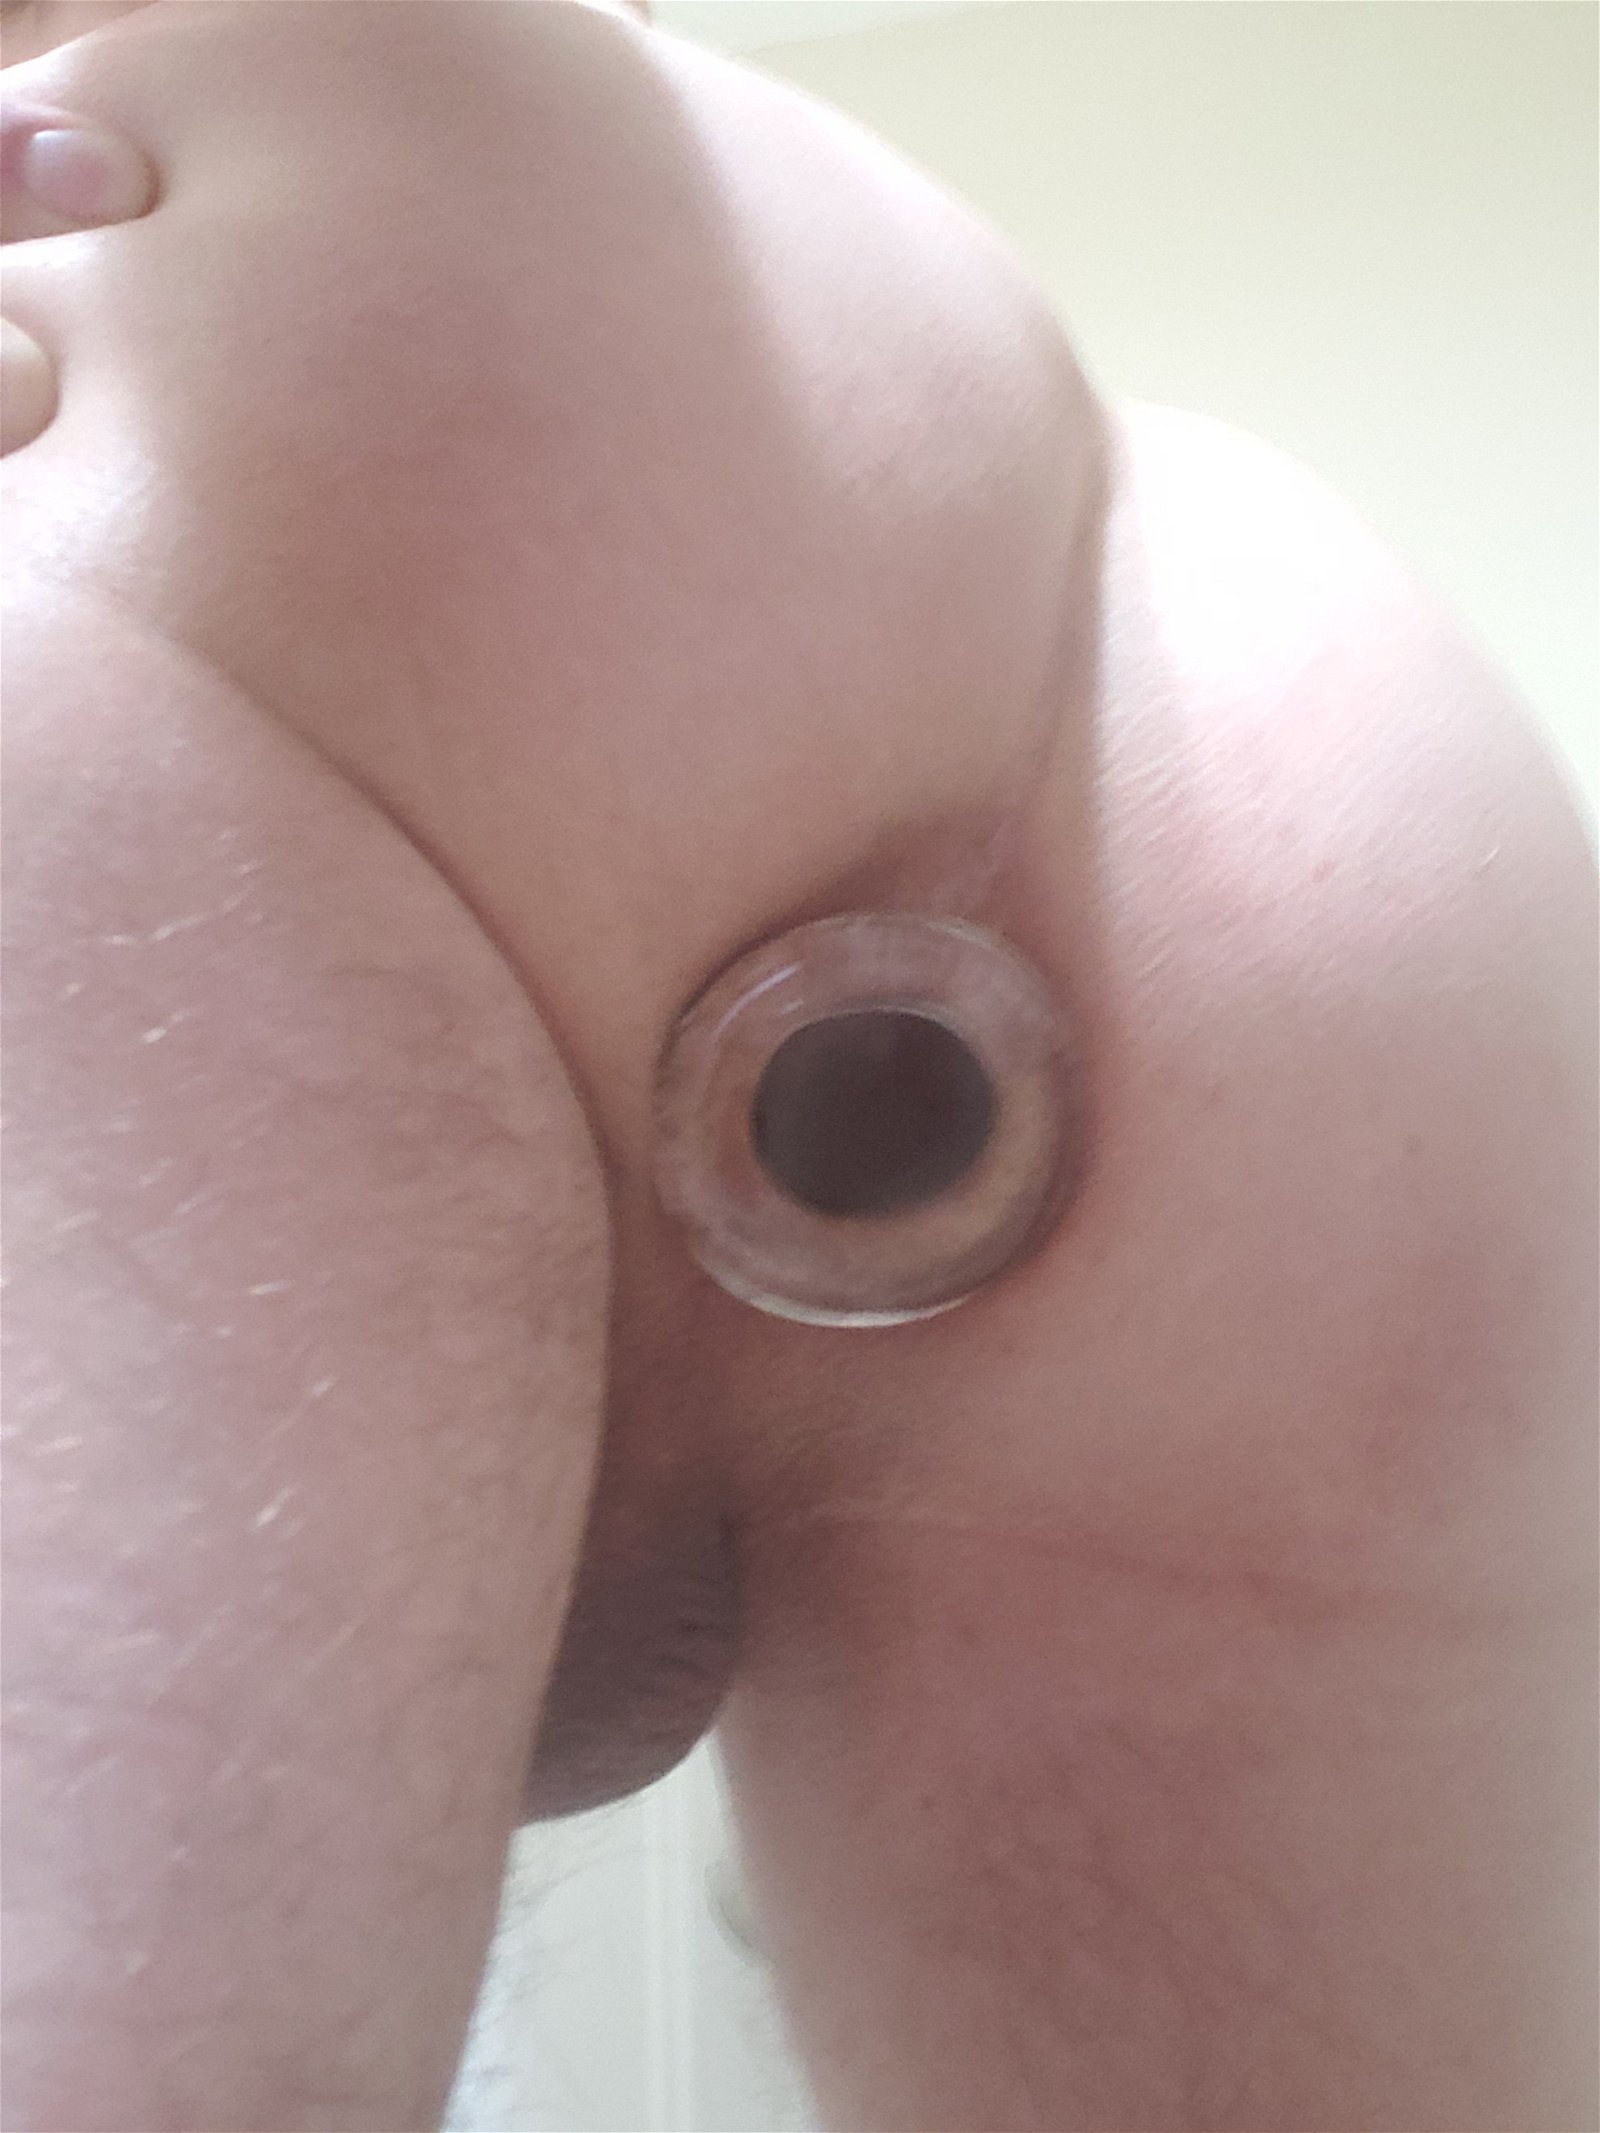 Photo by Wiseguy with the username @Wiseguy, who is a verified user,  May 29, 2020 at 7:18 PM. The post is about the topic Butt Plug and the text says 'I'm going to wear this plug around the house for a couple hours to get ready for todays session'